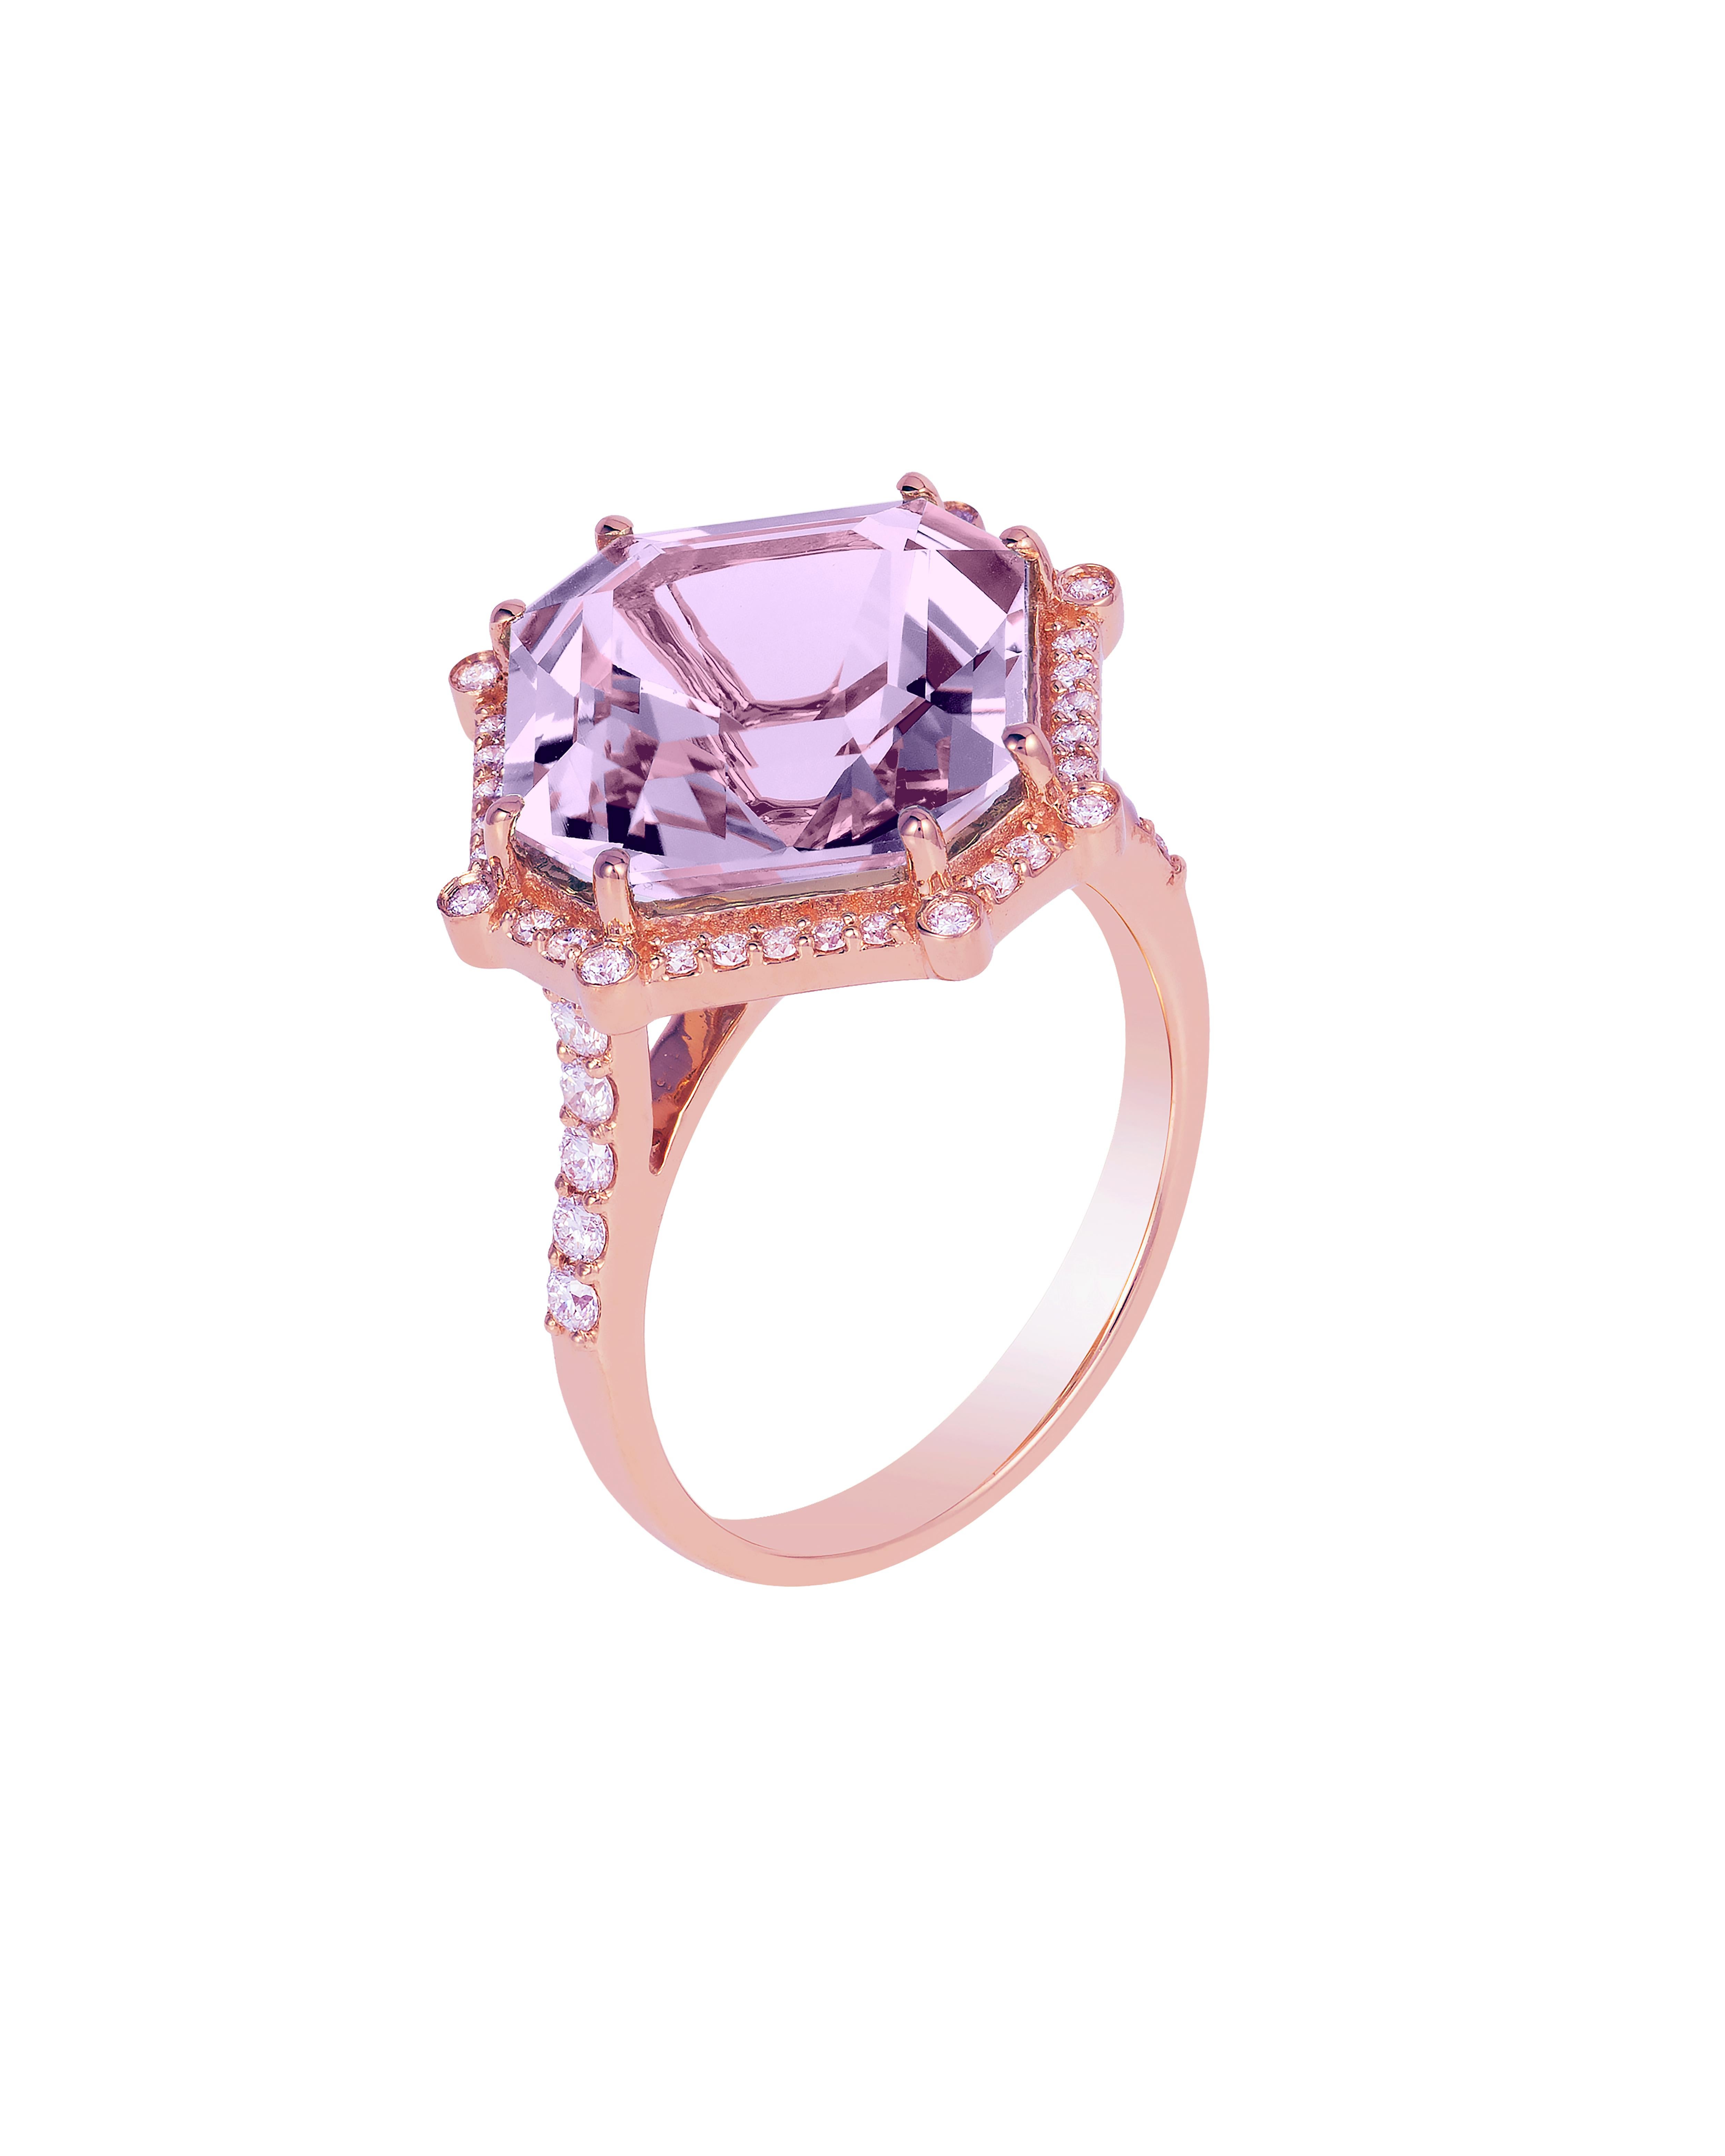 Lavender Amethyst Octagon Ring in 18K Rose Gold with Diamonds from 'Gossip' Collection

Stone Size: 12 x 12 mm 

Diamonds: G-H / VS, Approx Wt:0.36 Cts